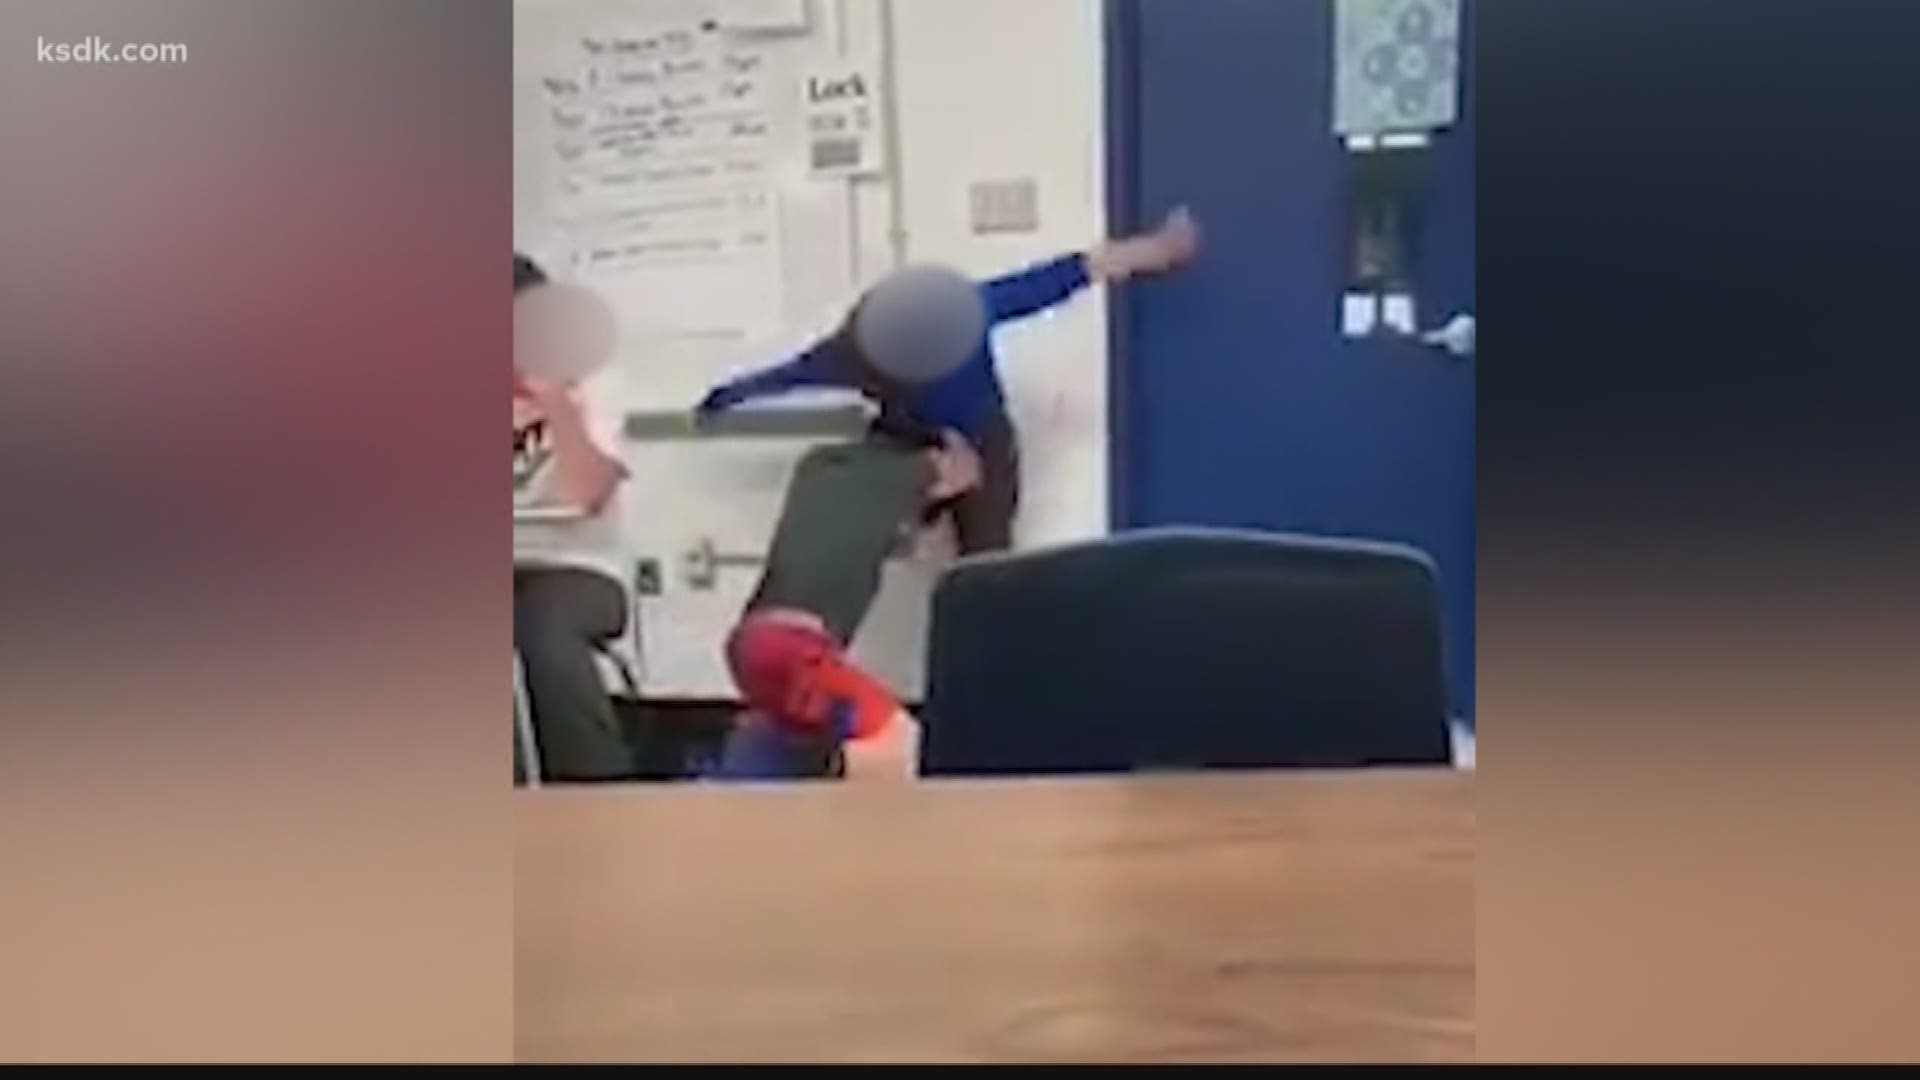 The video went viral. Two kids in a Wentzville school, one punching the other over and over.